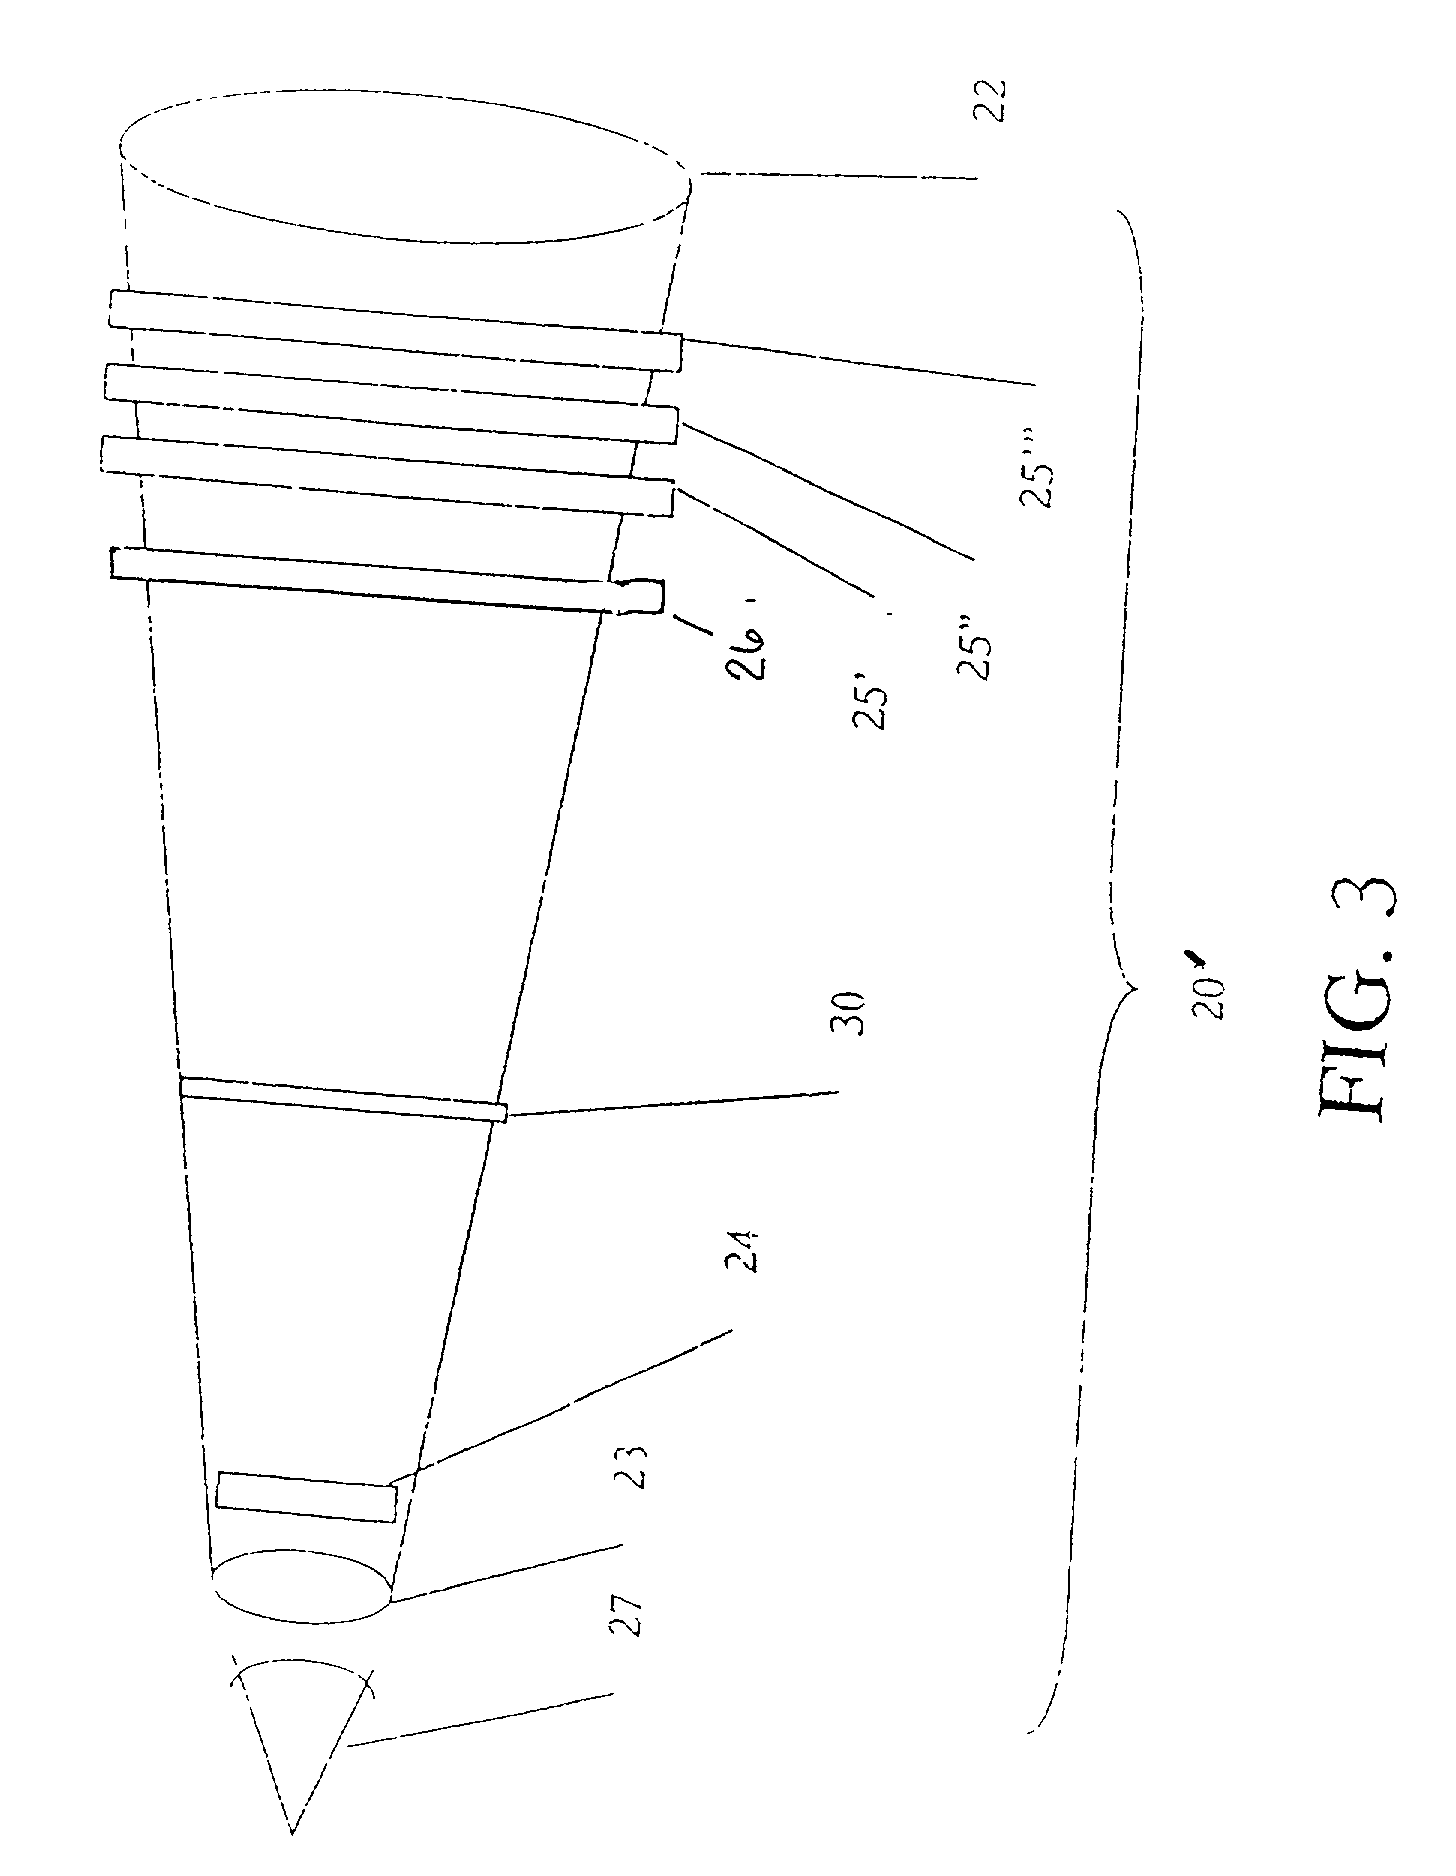 Optical system for increasing contrast of object viewed through it